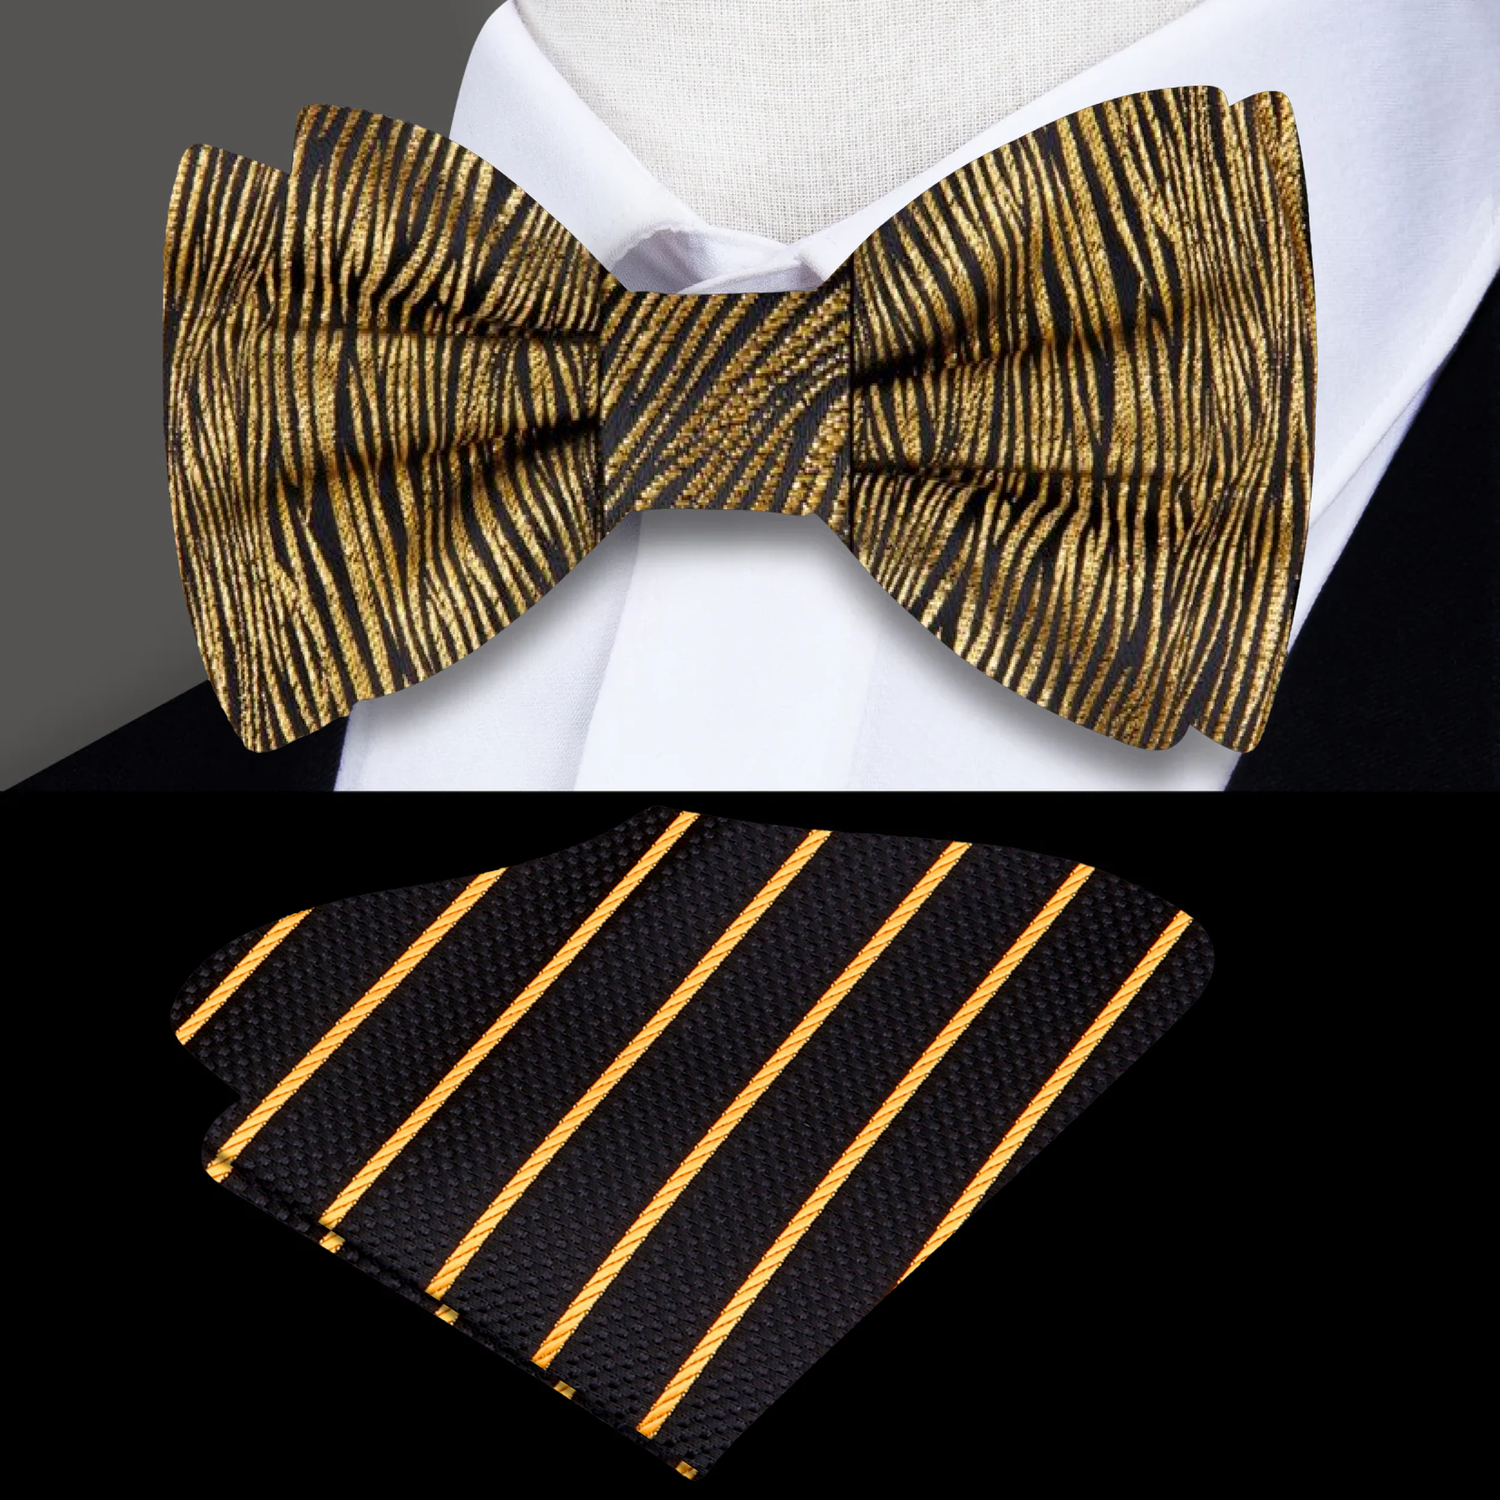 Black, Gold Zebra Texture Bow Tie and Accenting Pocket Square